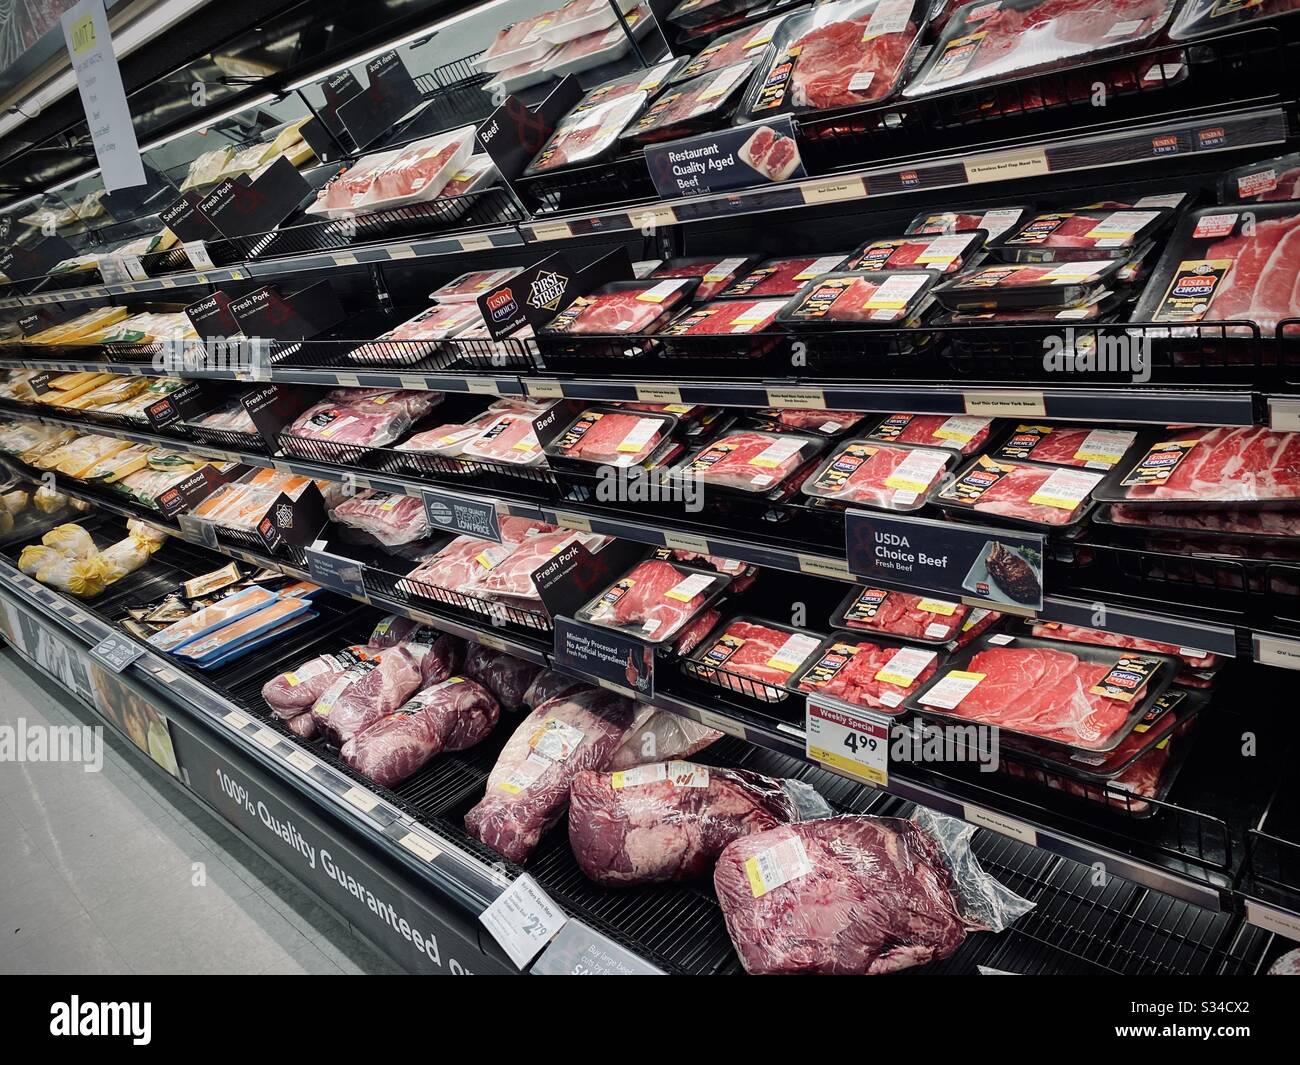 LOS ANGELES, CA, MAR 2020: shelves of fresh meat in refrigerated section of Smart & Final supermarket, Downtown Stock Photo